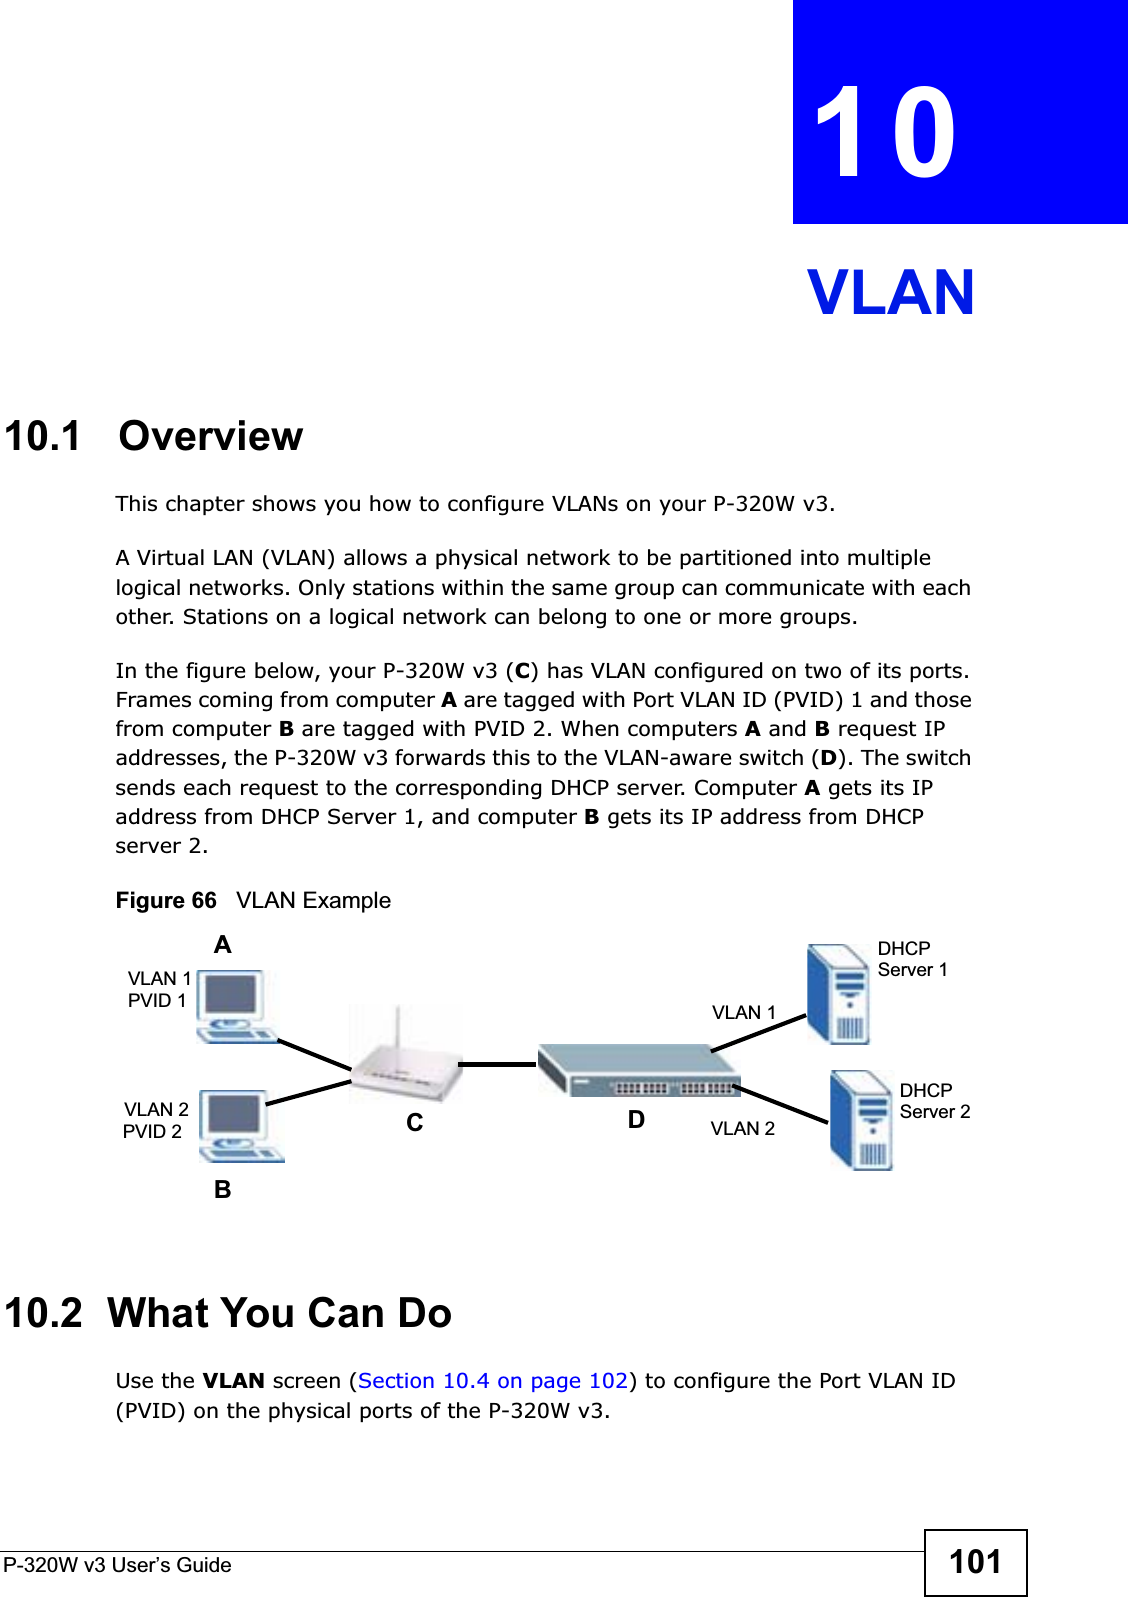 P-320W v3 User’s Guide 101CHAPTER 10VLAN10.1   OverviewThis chapter shows you how to configure VLANs on your P-320W v3.A Virtual LAN (VLAN) allows a physical network to be partitioned into multiple logical networks. Only stations within the same group can communicate with each other. Stations on a logical network can belong to one or more groups.In the figure below, your P-320W v3 (C) has VLAN configured on two of its ports. Frames coming from computer A are tagged with Port VLAN ID (PVID) 1 and those from computer B are tagged with PVID 2. When computers A and B request IP addresses, the P-320W v3 forwards this to the VLAN-aware switch (D). The switch sends each request to the corresponding DHCP server. Computer A gets its IP address from DHCP Server 1, and computer B gets its IP address from DHCP server 2.Figure 66   VLAN Example10.2  What You Can DoUse the VLAN screen (Section 10.4 on page 102) to configure the Port VLAN ID (PVID) on the physical ports of the P-320W v3. VLAN 1PVID 1VLAN 2PVID 2VLAN 1DHCPServer 1DHCPServer 2VLAN 2ABCD